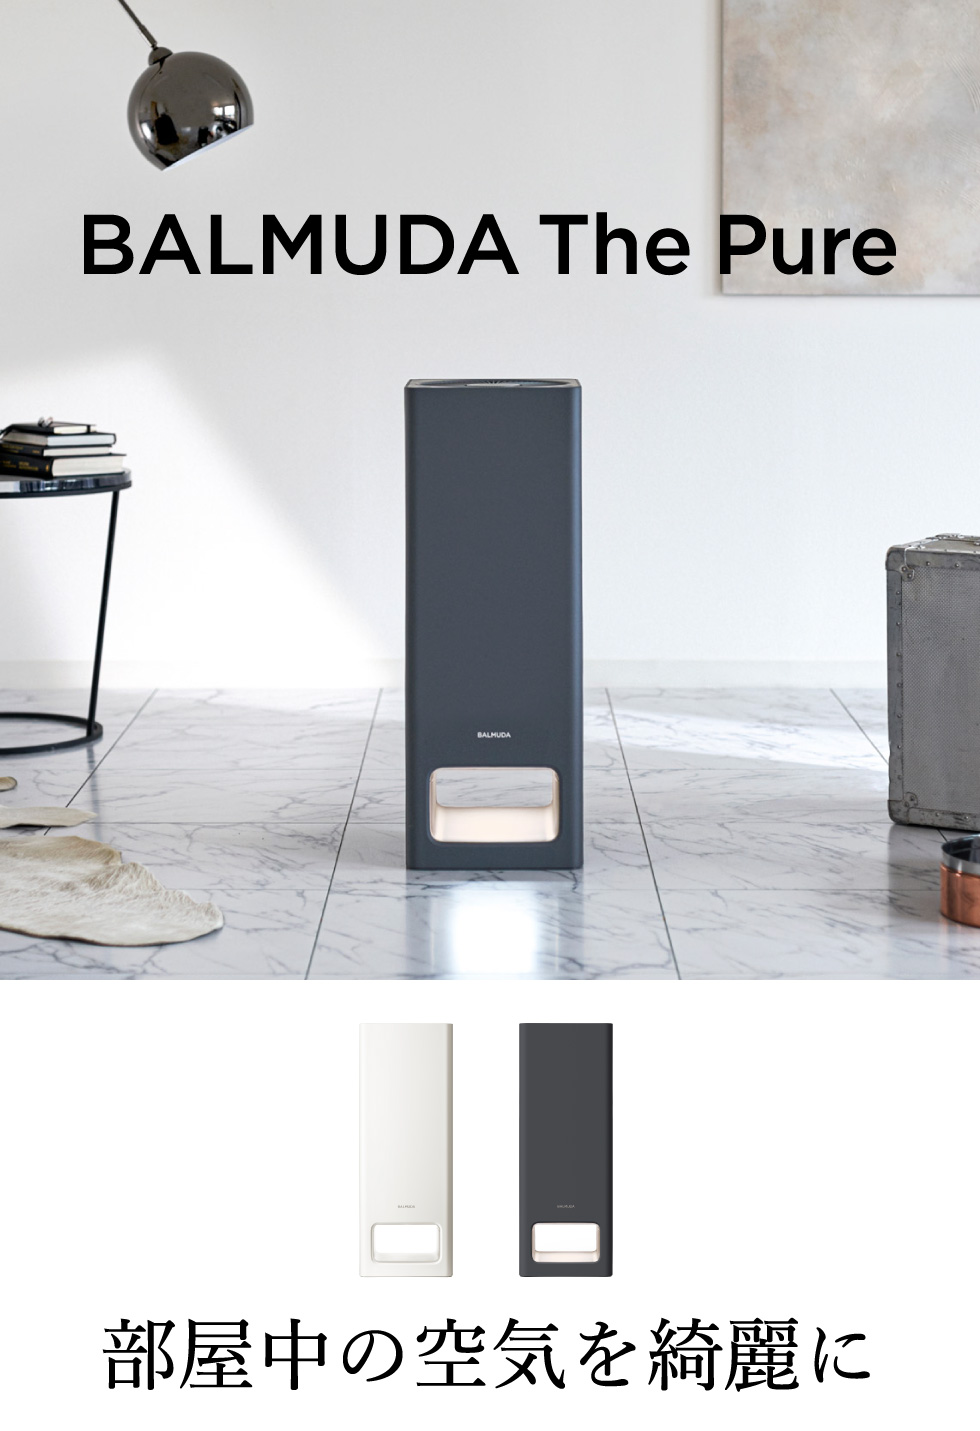 BALMUDA The Pure ホワイト 空気清浄機 〜36畳 A01A-WH バルミューダ